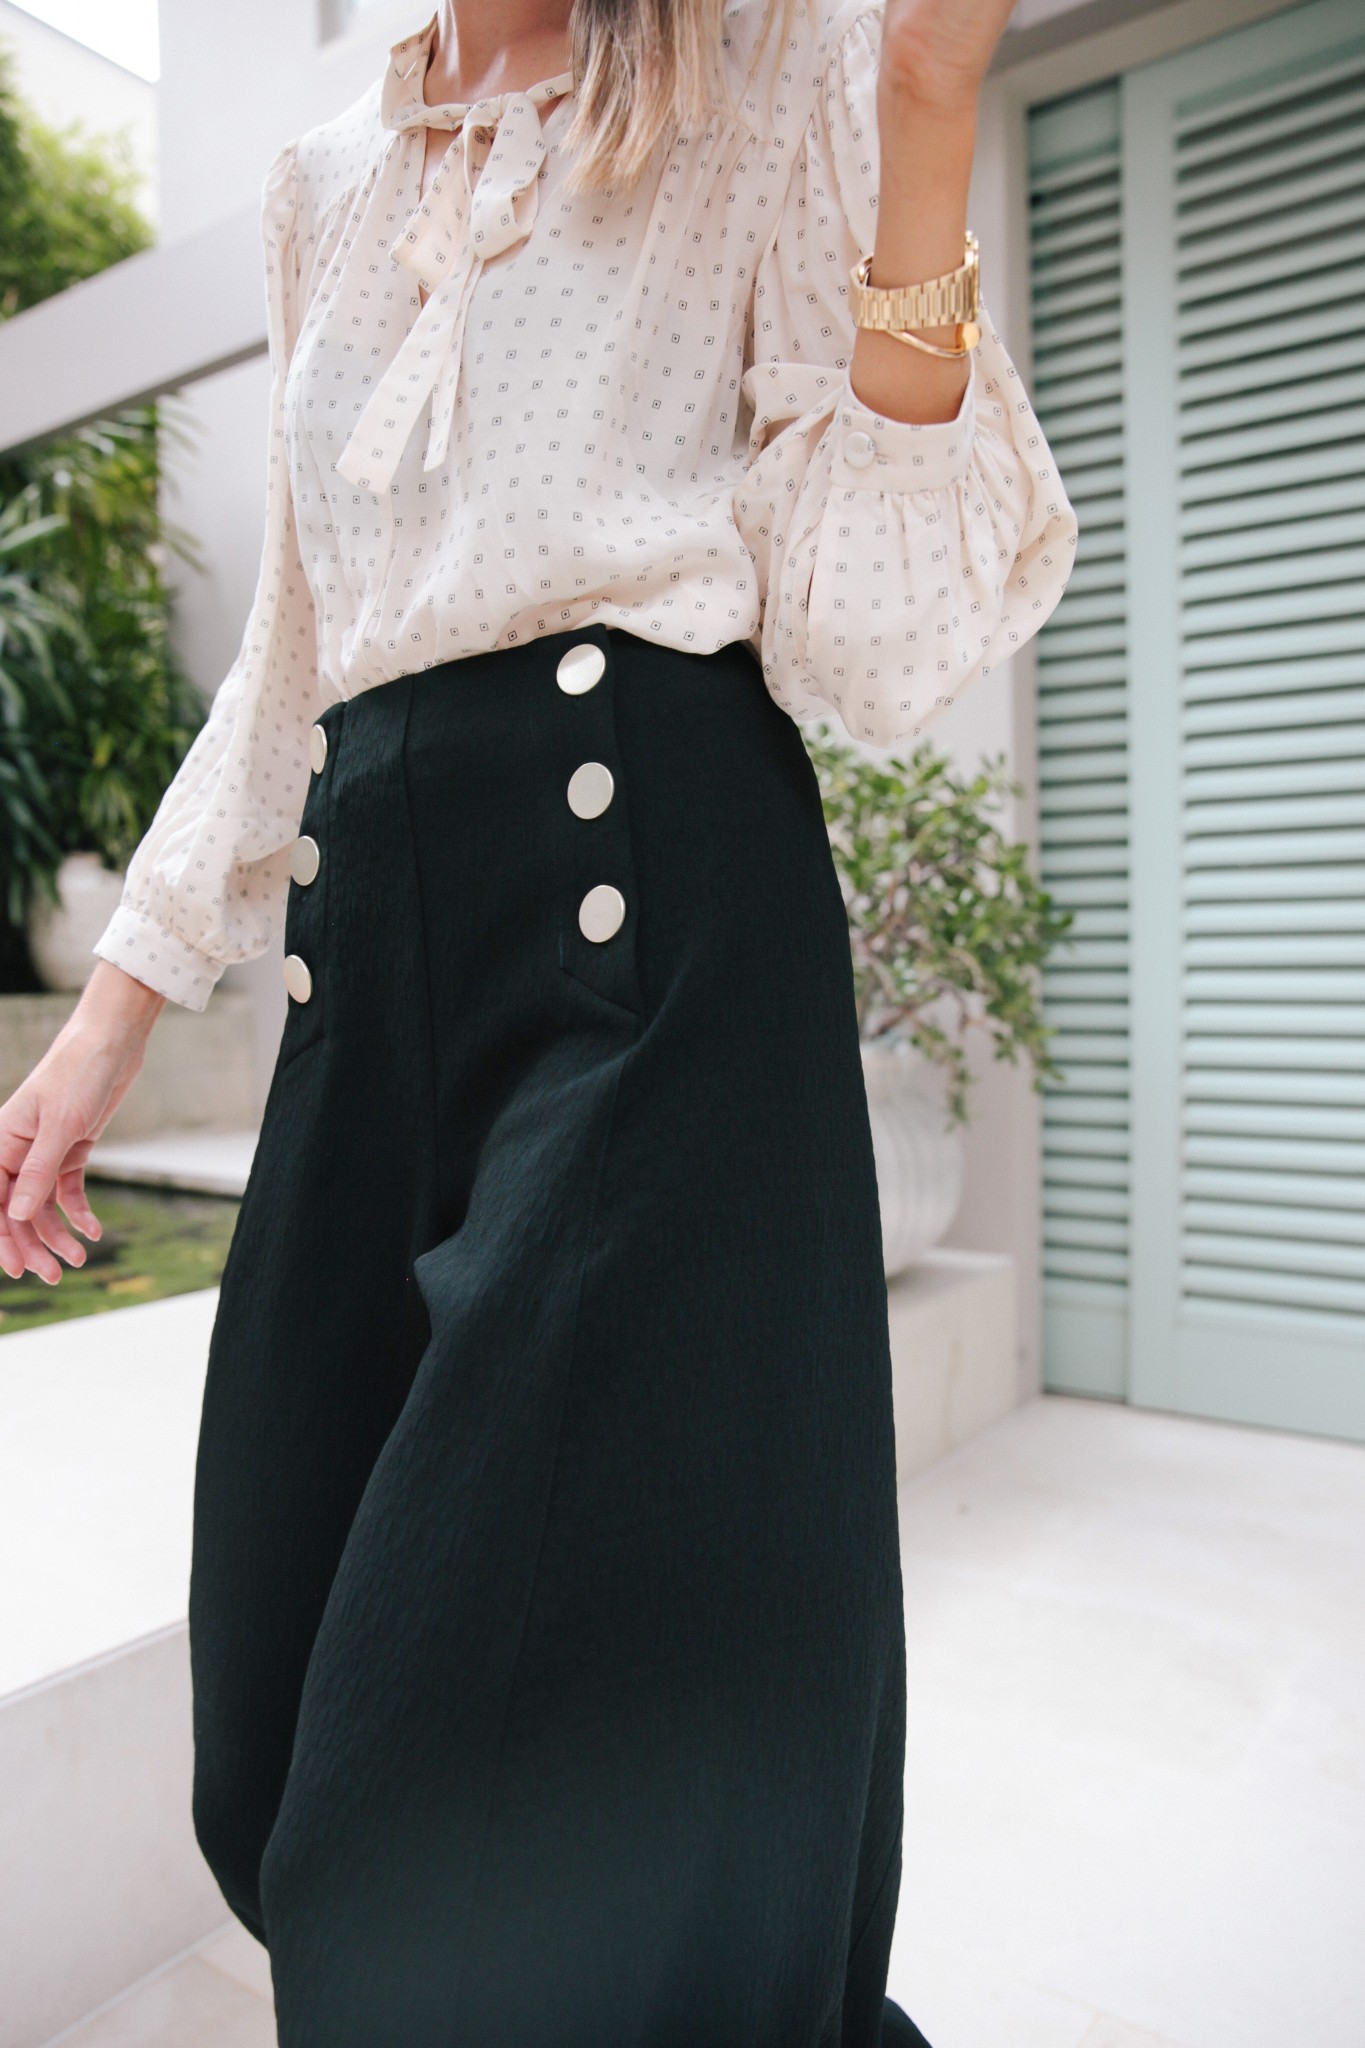 How to wear wide leg pants—my tips for a flattering fit